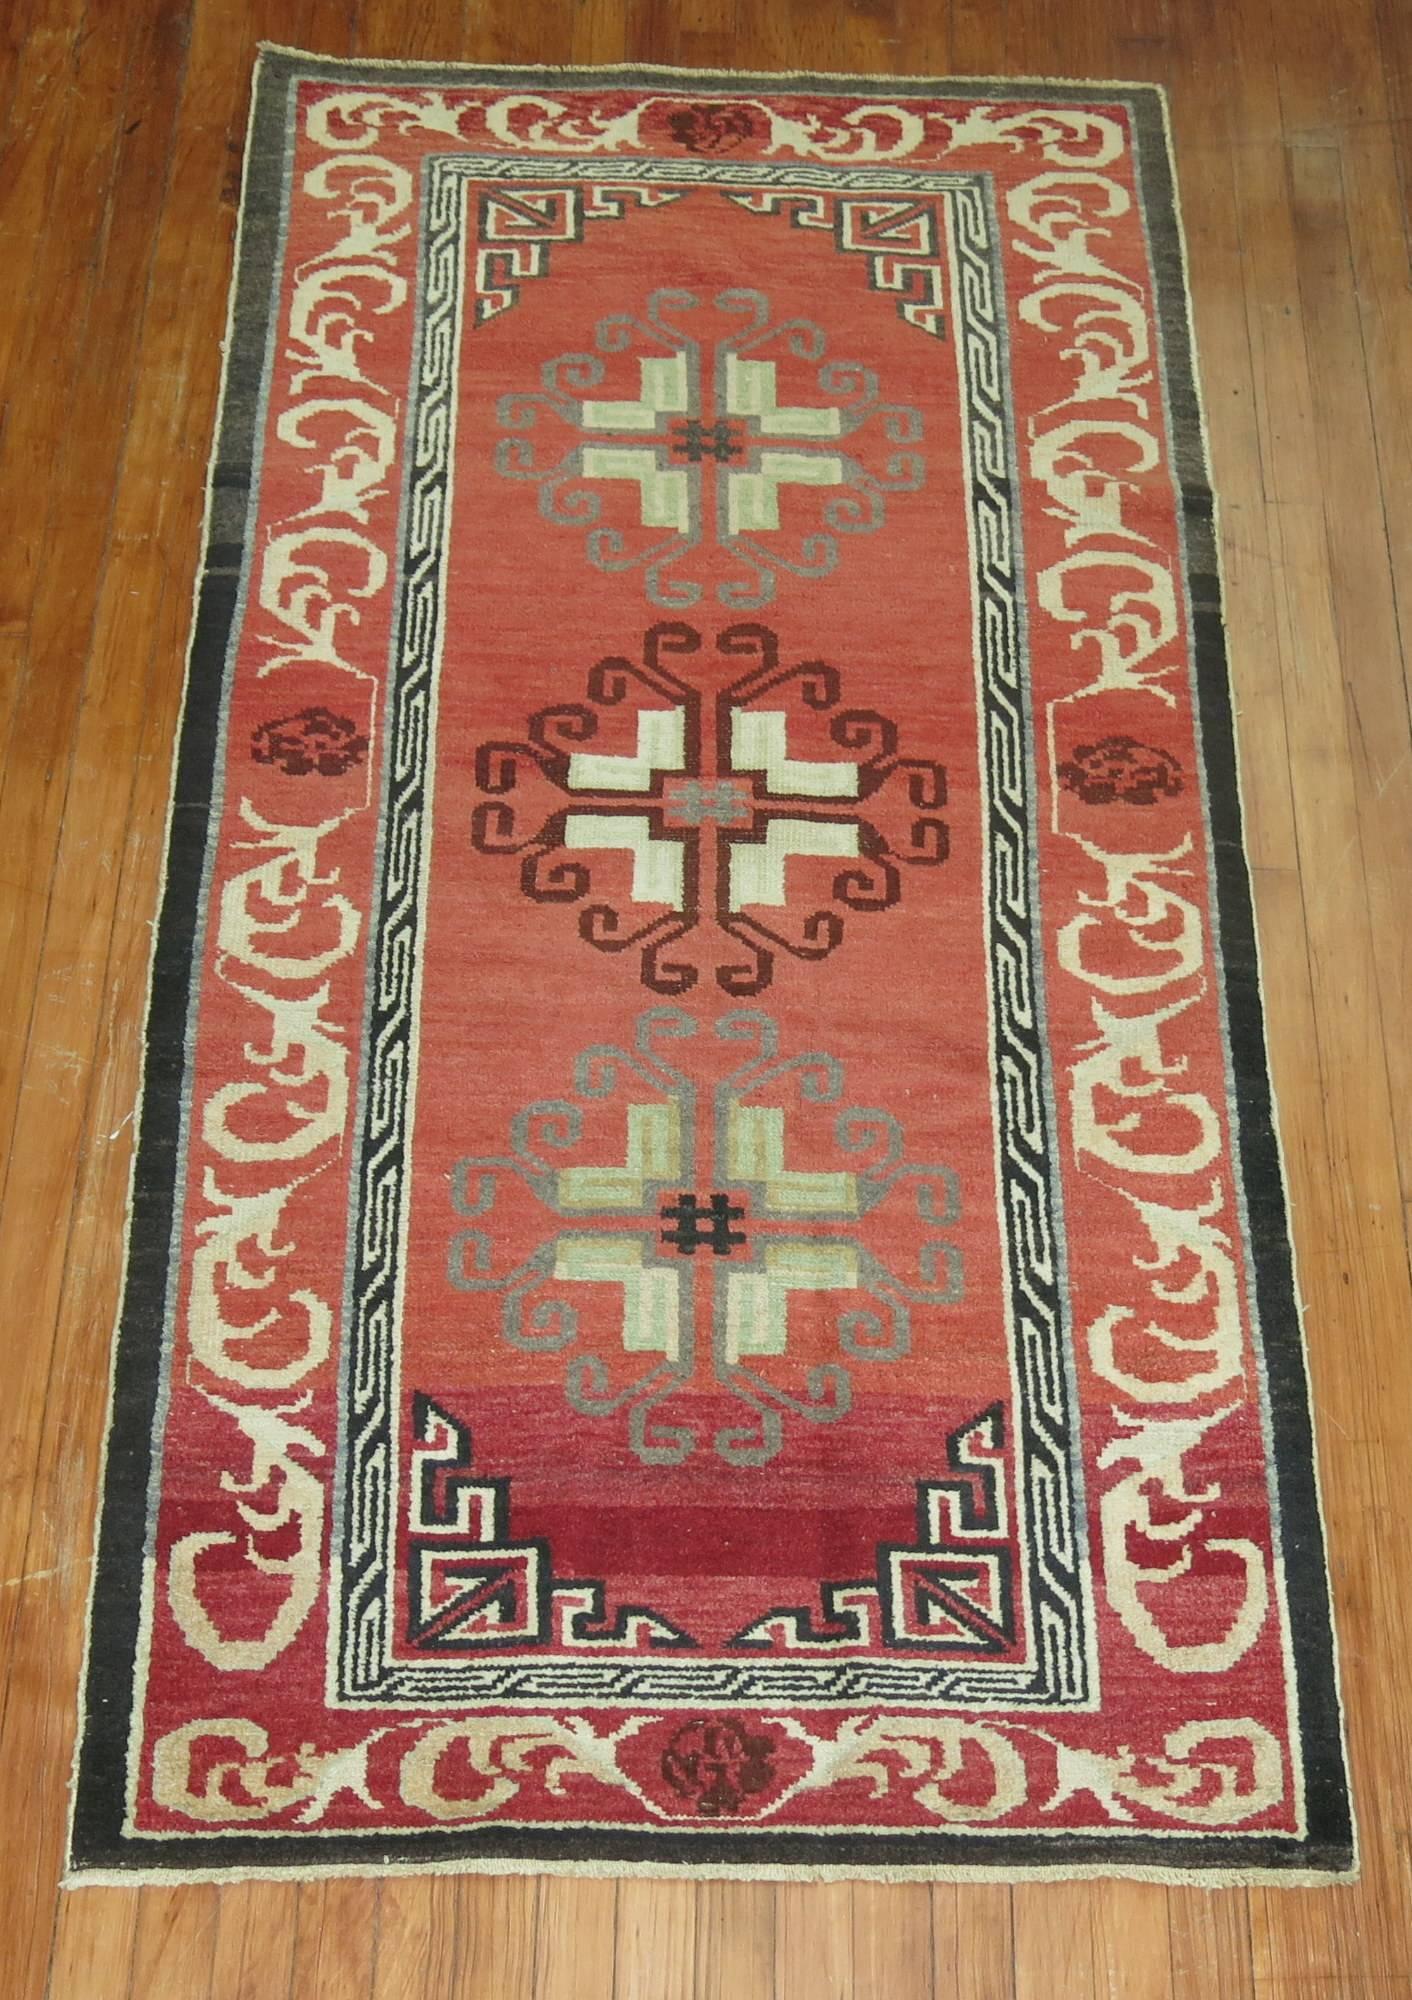 A one of a kind Turkish rug influenced by 19th century east Turkmenistan Khotan rugs.
3 round medallions on a rose ground, accents in brown, green, brown and gray accents, circa mid-20th century.

Measures: 3'2